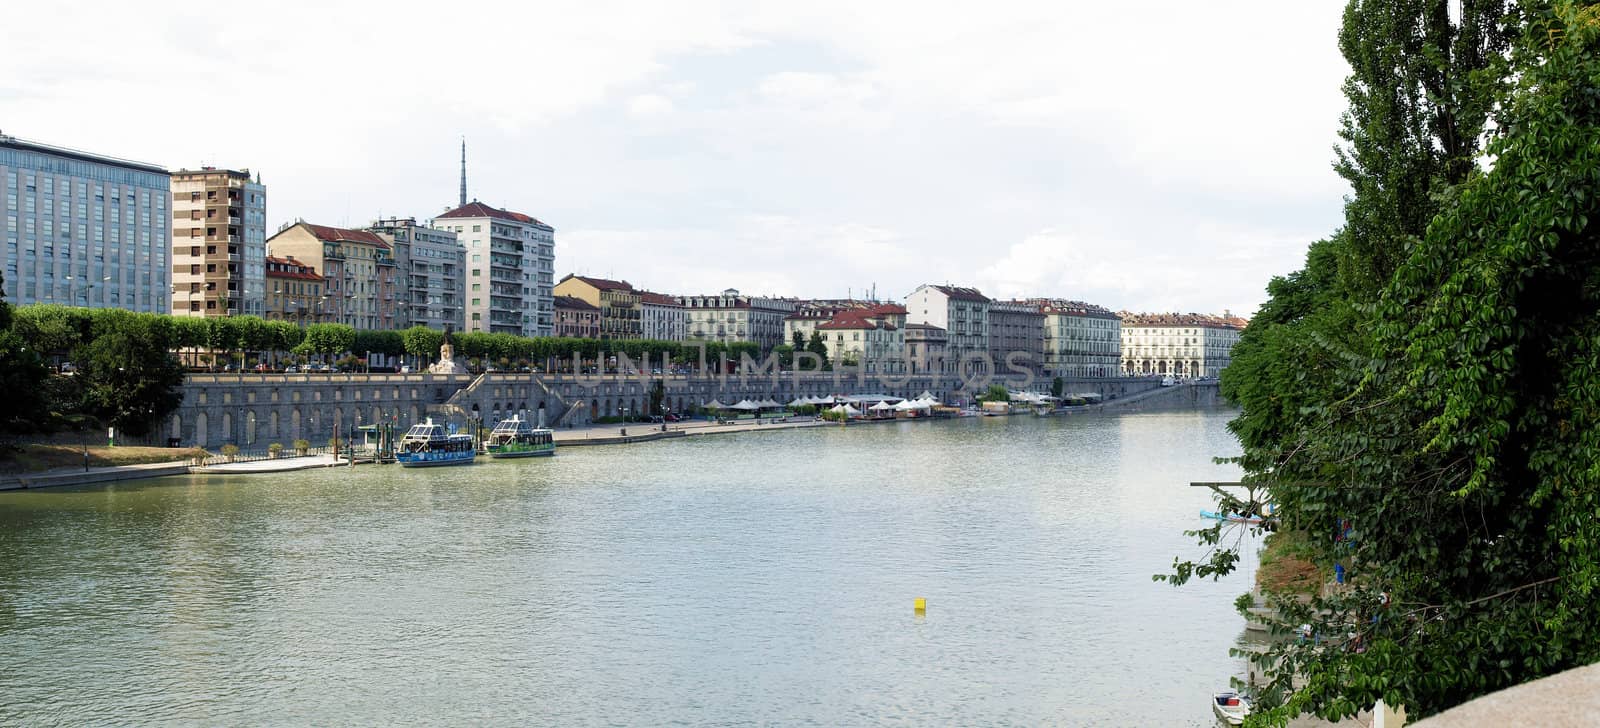 View of River Po in Turin, Italy